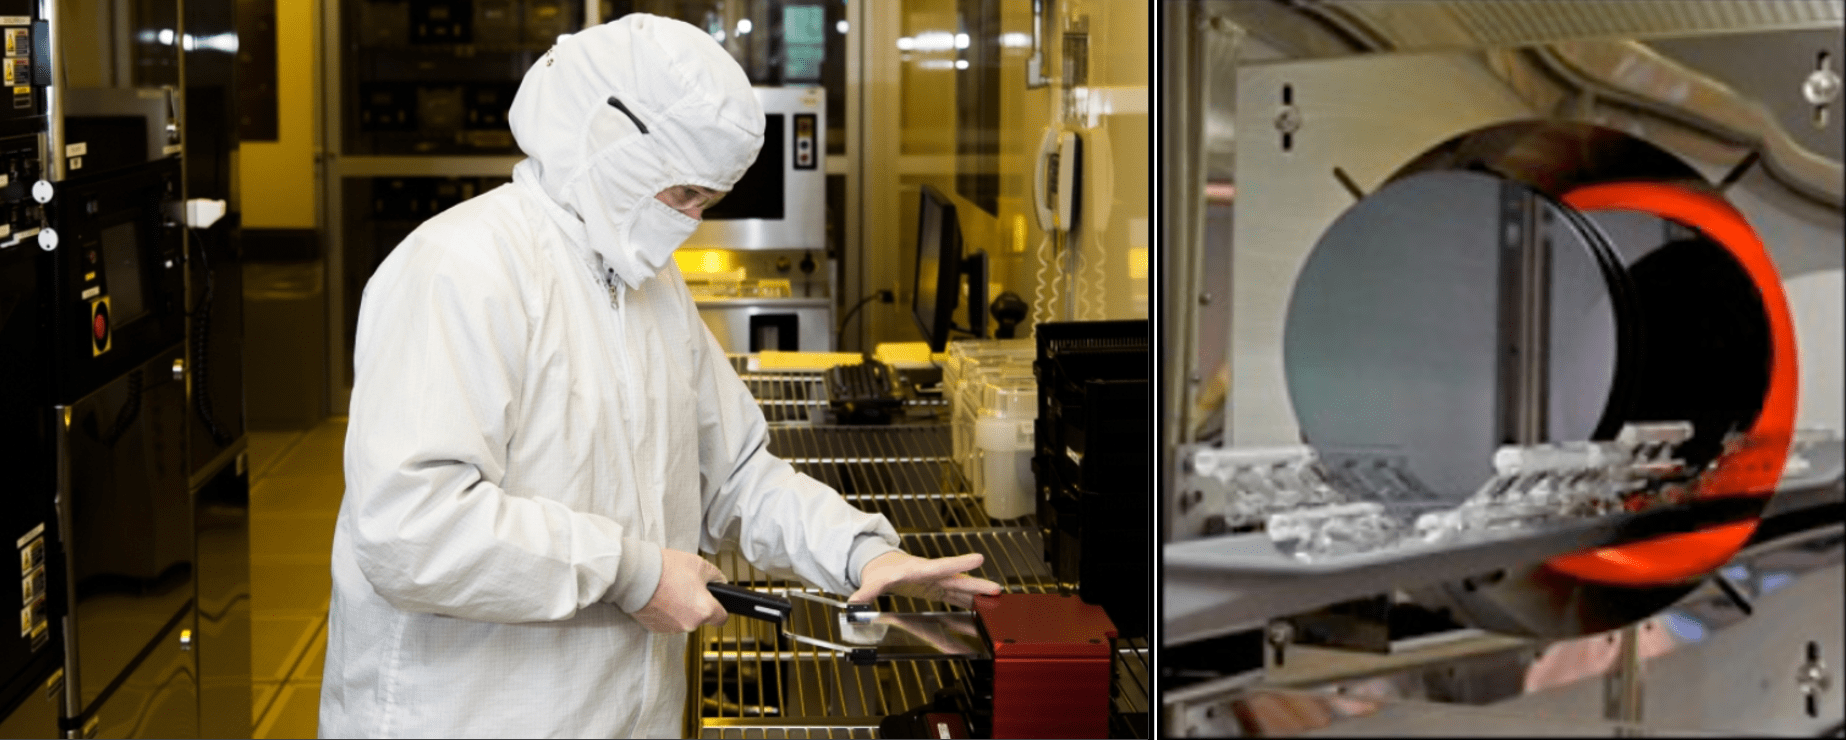 Two photos side by side. Left side: a person wearing a white protective lab suit and hat stands at a lab station working with a lithography tool. Right side: photo of the metal grey furnace with small white silicon wafers inside.